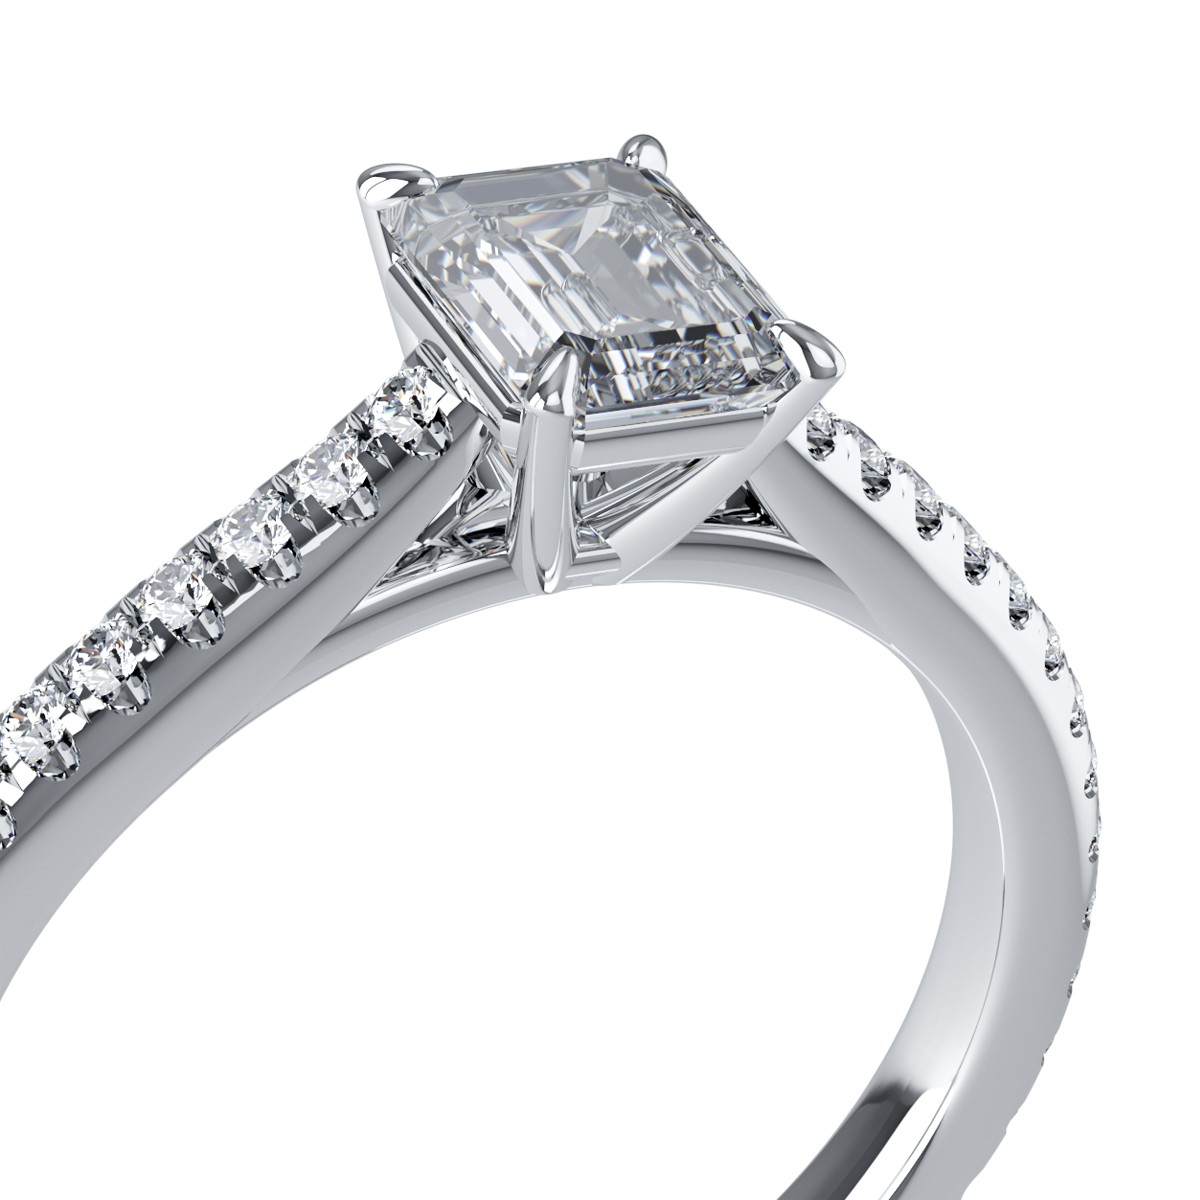 18K white gold engagement ring with 1.51ct diamond and 0.33ct diamonds